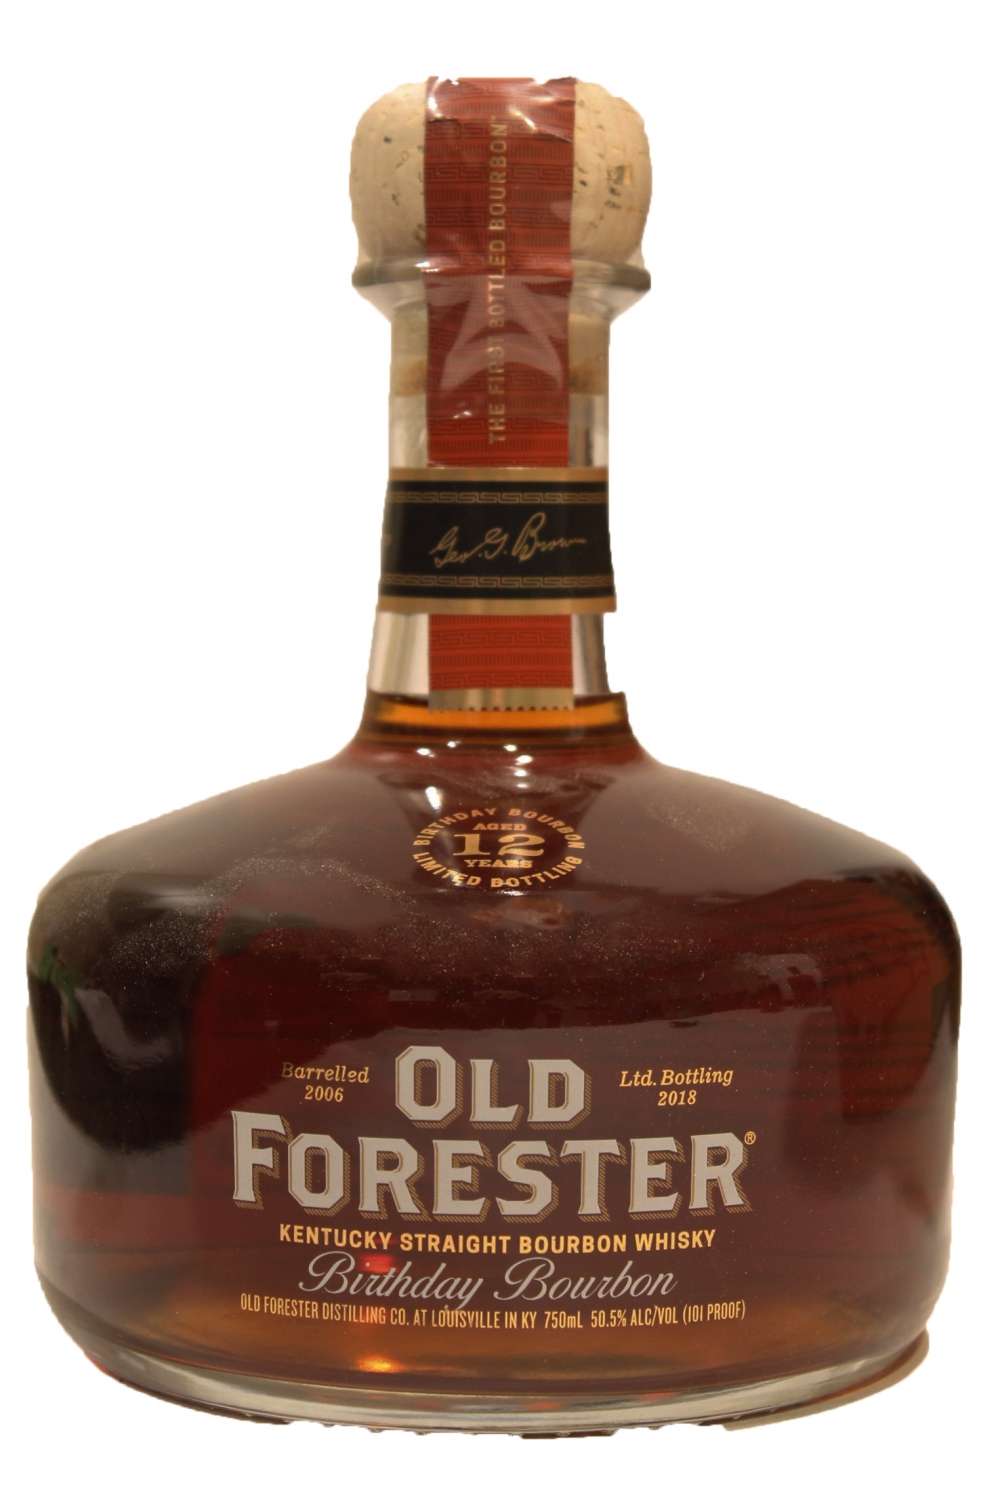 Old Forester Birthday Bourbon 2020 Release